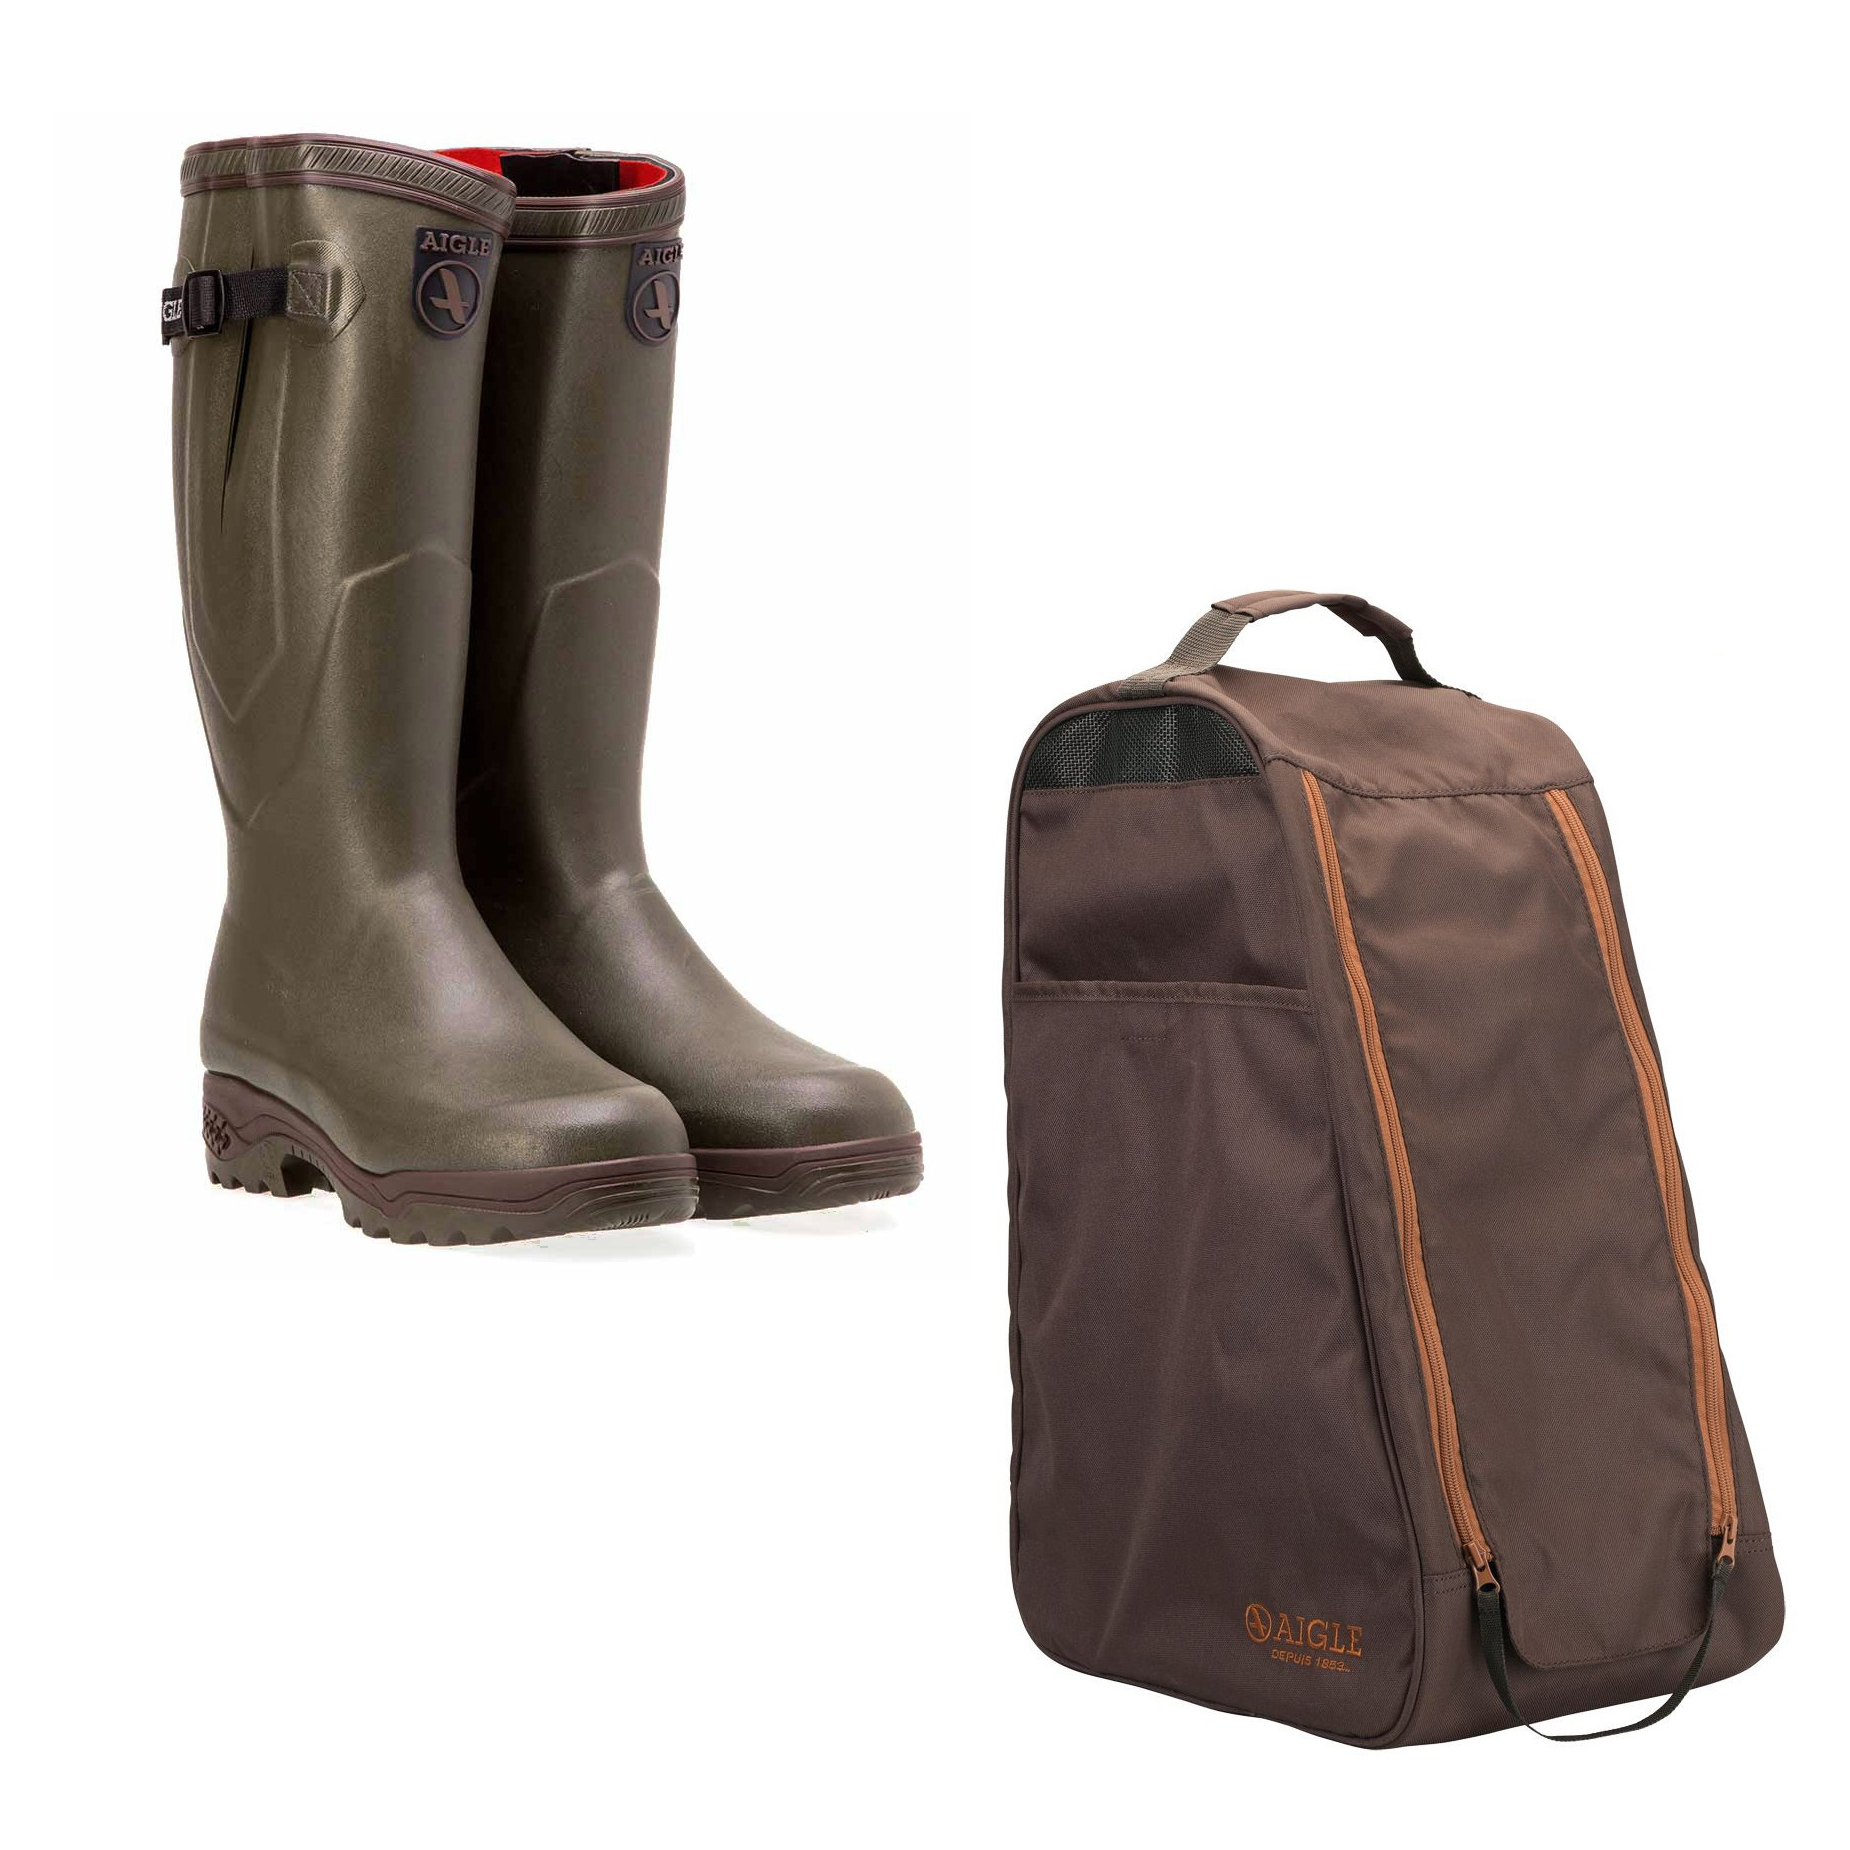 Aigle boot bag waterproof shoe bag wellington boot or ankle boot carrier 